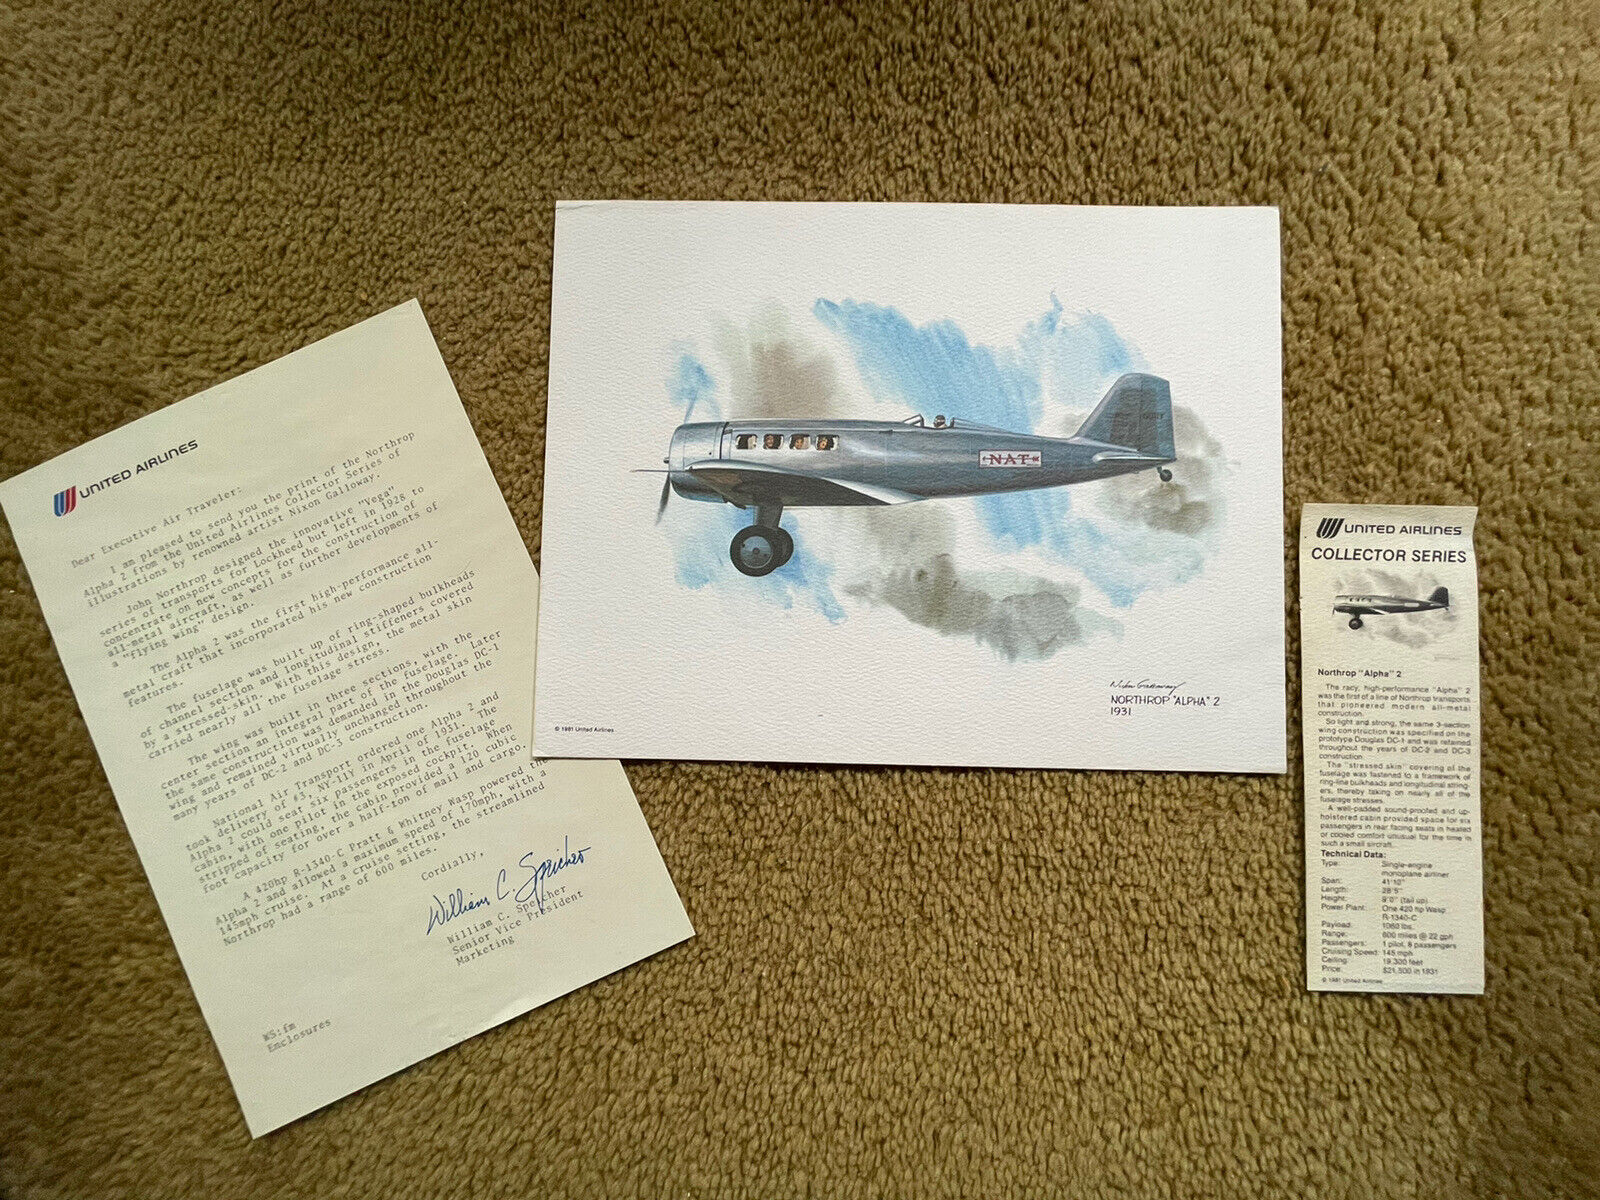 United Airlines Northrop Alpha 2 Airplane, Nixon Galloway Print W/Letter ++ 1981